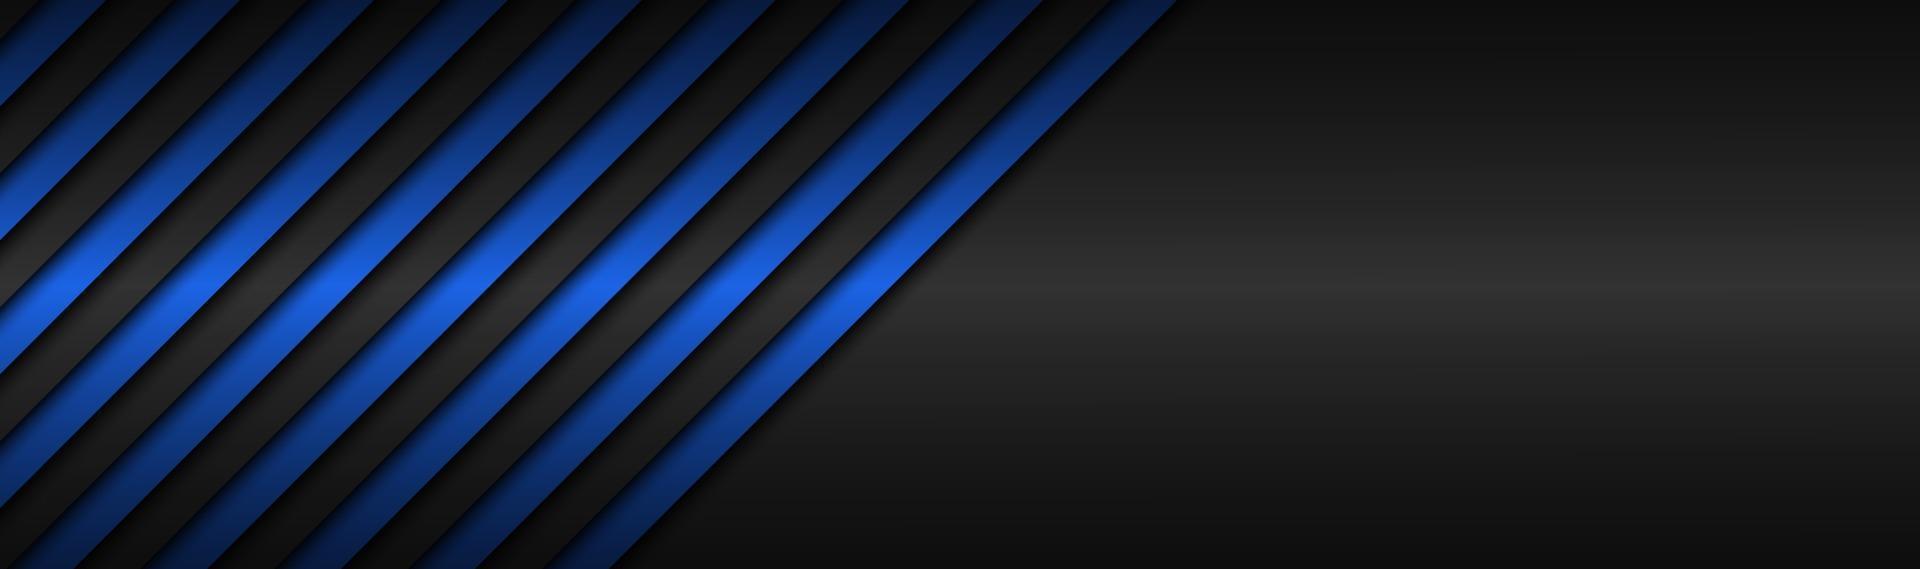 Dark blue abstract metallic vector header with slanting lines Blue striped pattern parallel lines and strips Vector abstract widescreen background with blank space for your logo